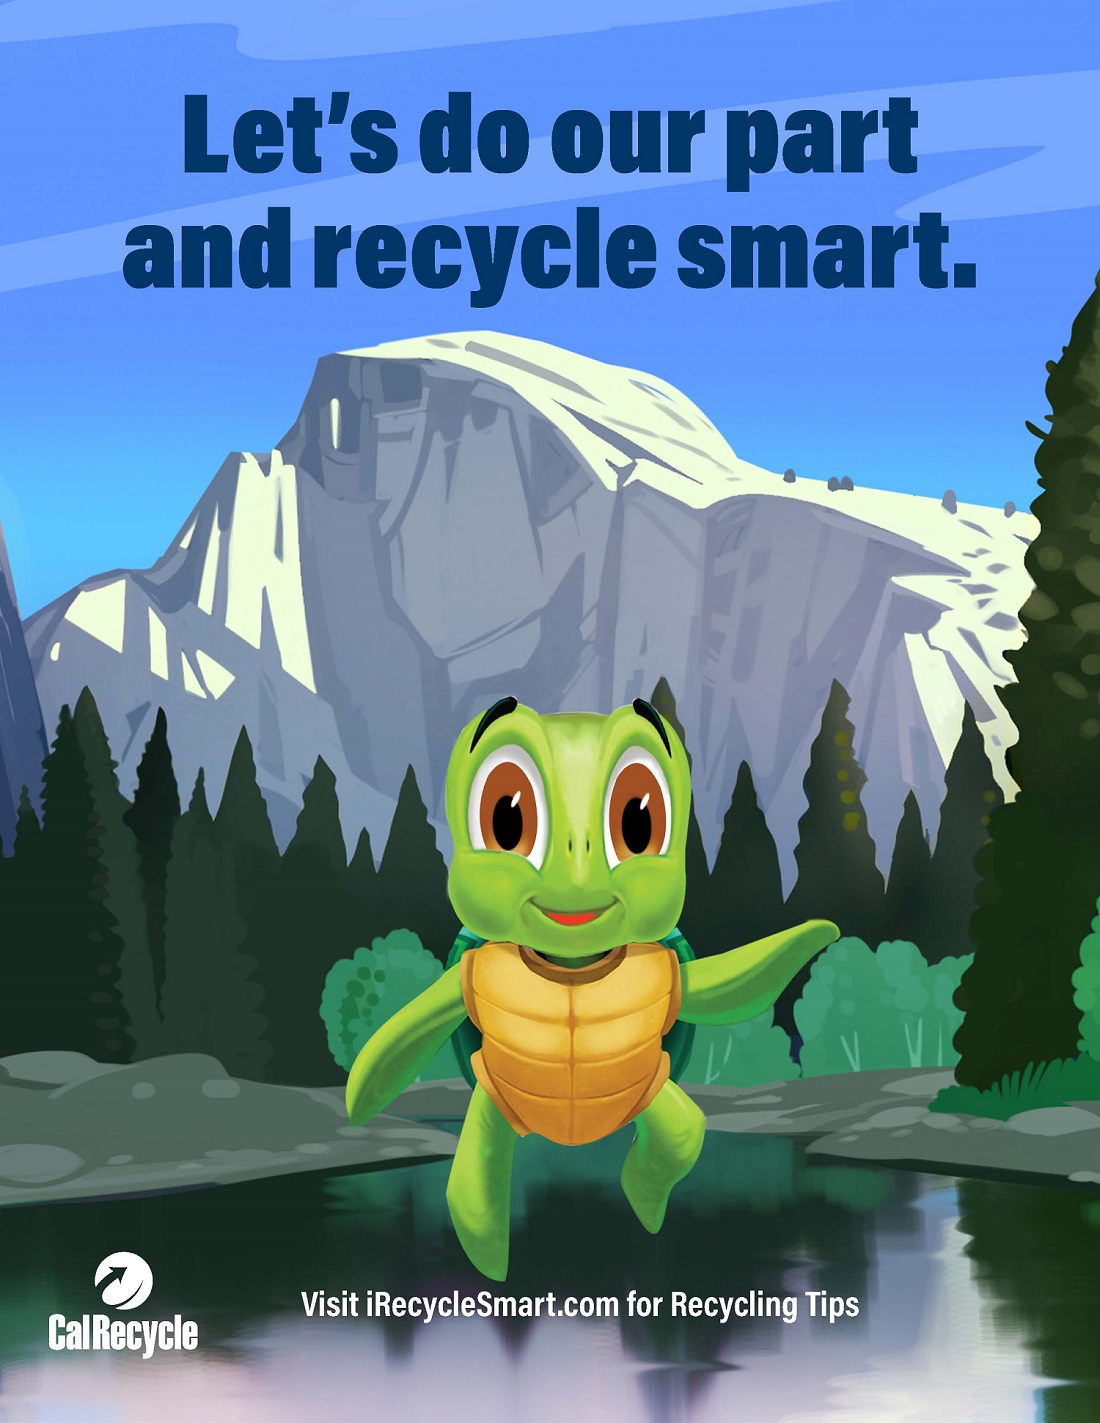 Let's do our part and recycle smart.